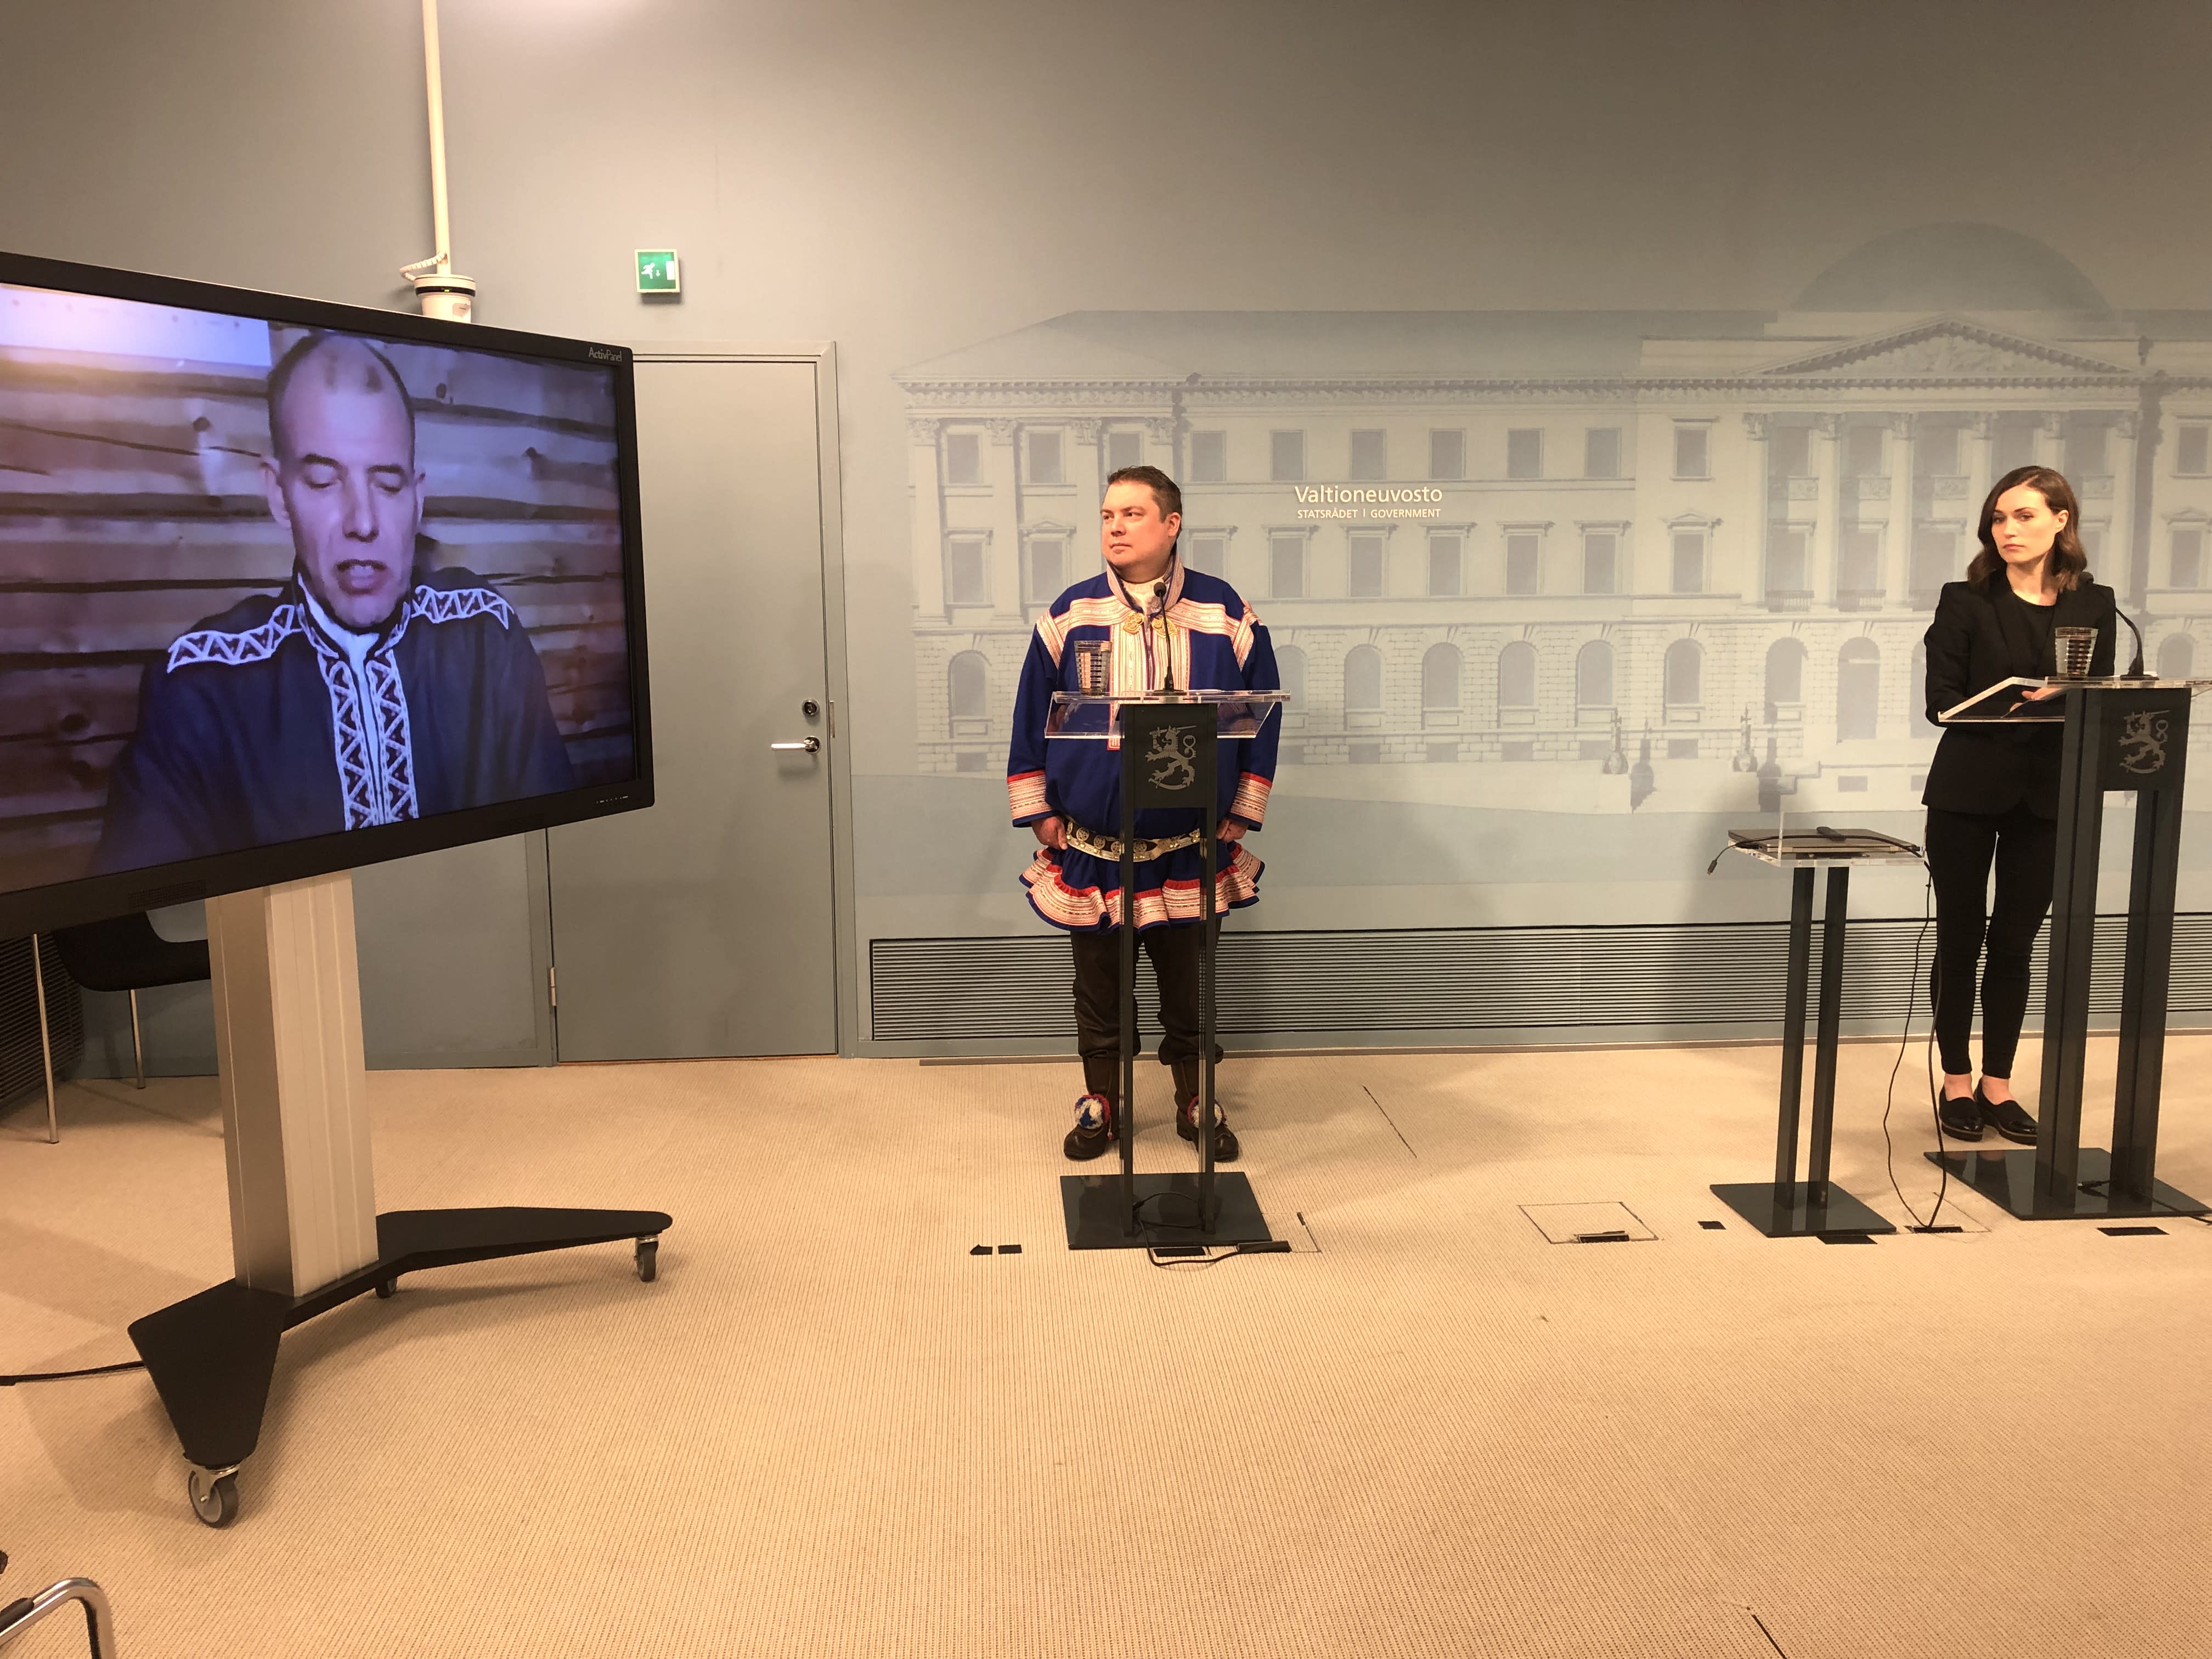 Finland sets up a Sámi reconciliation commission to investigate the injustice of indigenous peoples